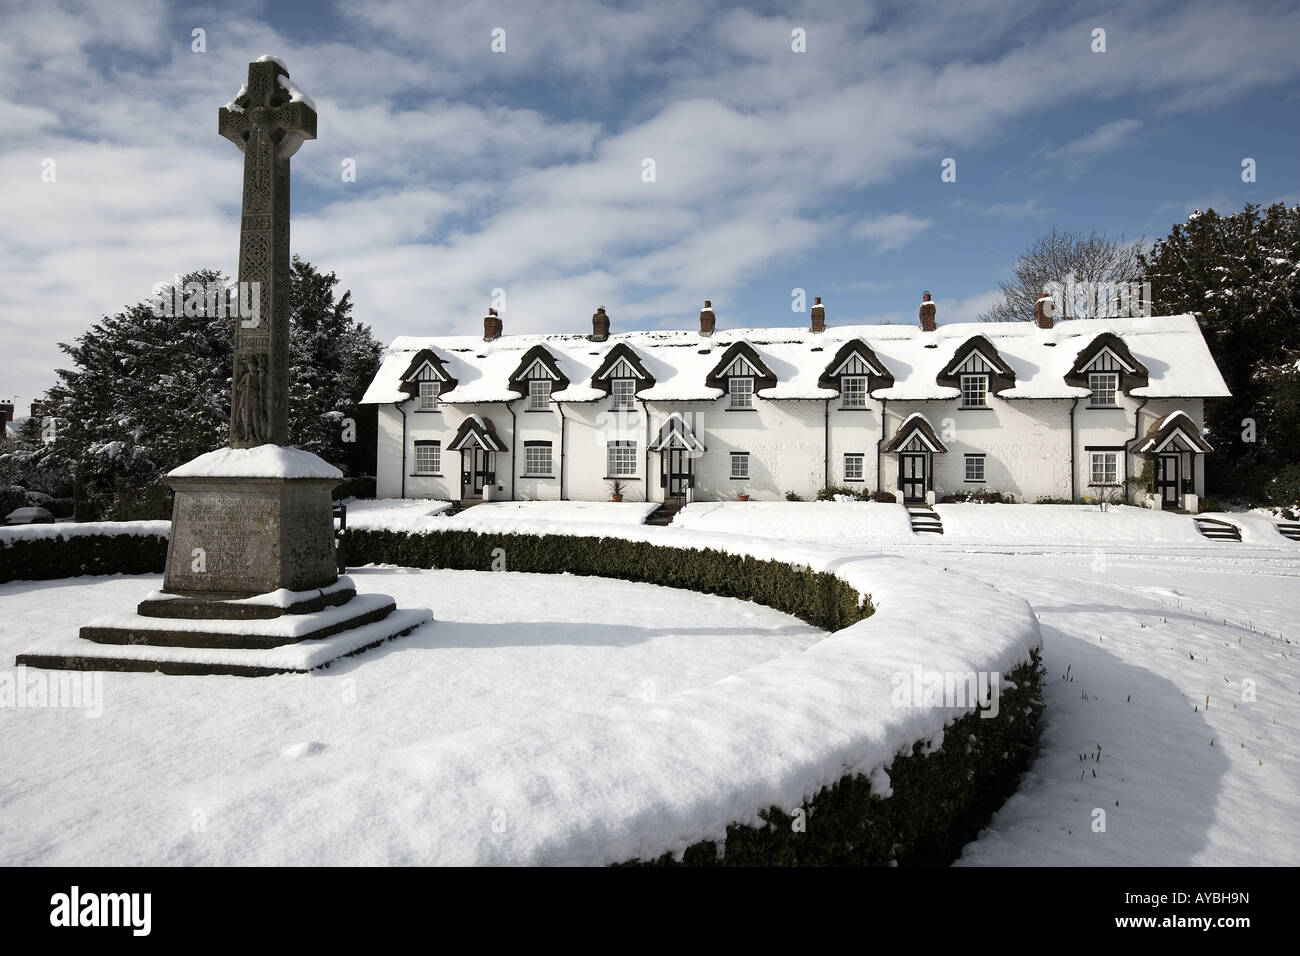 The thatched cottages and war memorial on the green covered in snow Warter East Yorkshire England UK Stock Photo